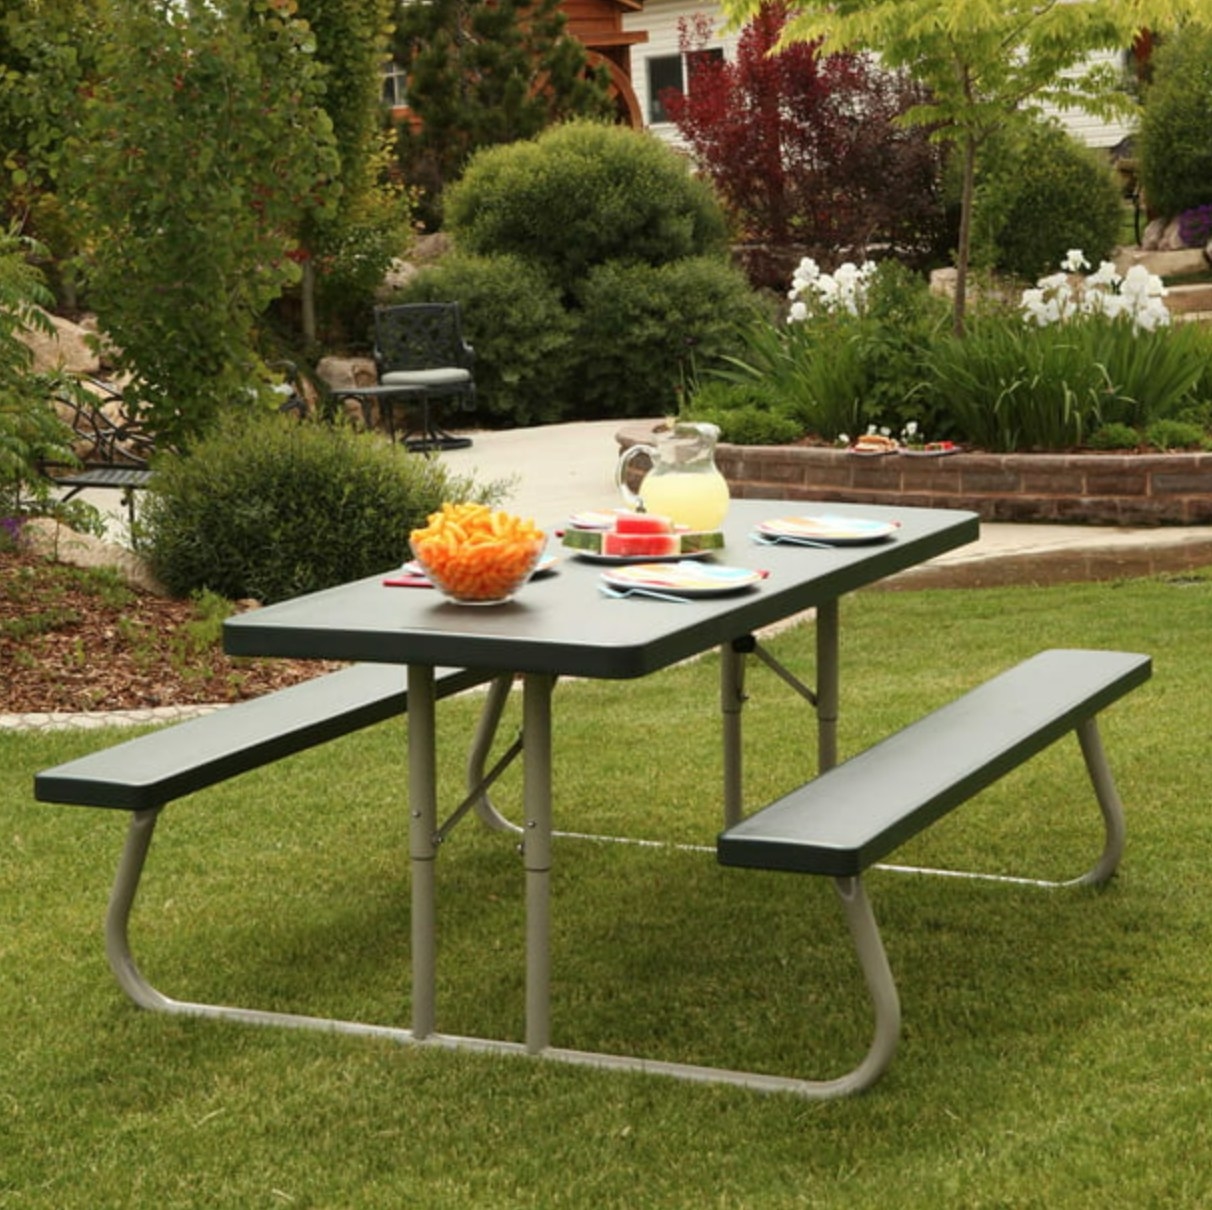 the green picnic table with a metal frame in a decorated outdoor space